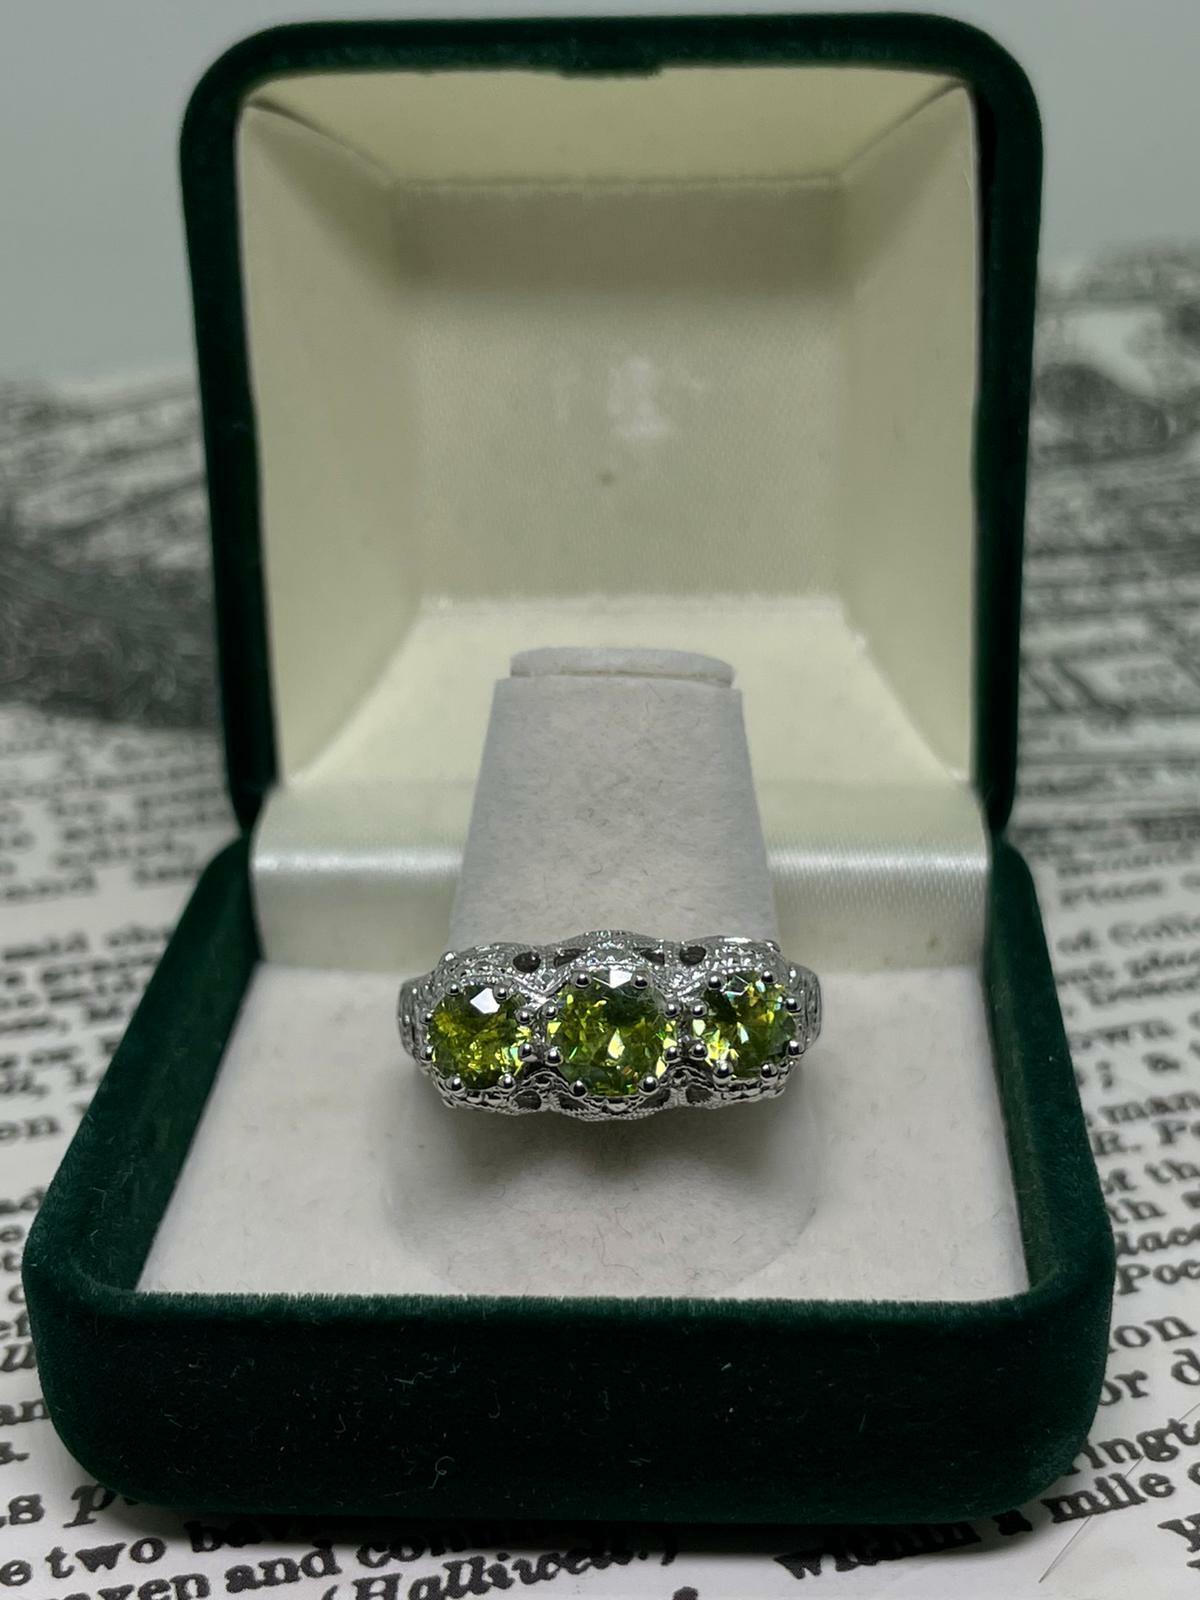 Meticulously Crafted in 925 Sterling Silver, 
centering 3 Green coloured Sparkling Crystals
with lovely flashes of red & orange,

set within gorgeous pierced gallery setting, 
featuring openwork & floral motifs 

Dimensions of the setting: 8mm (high